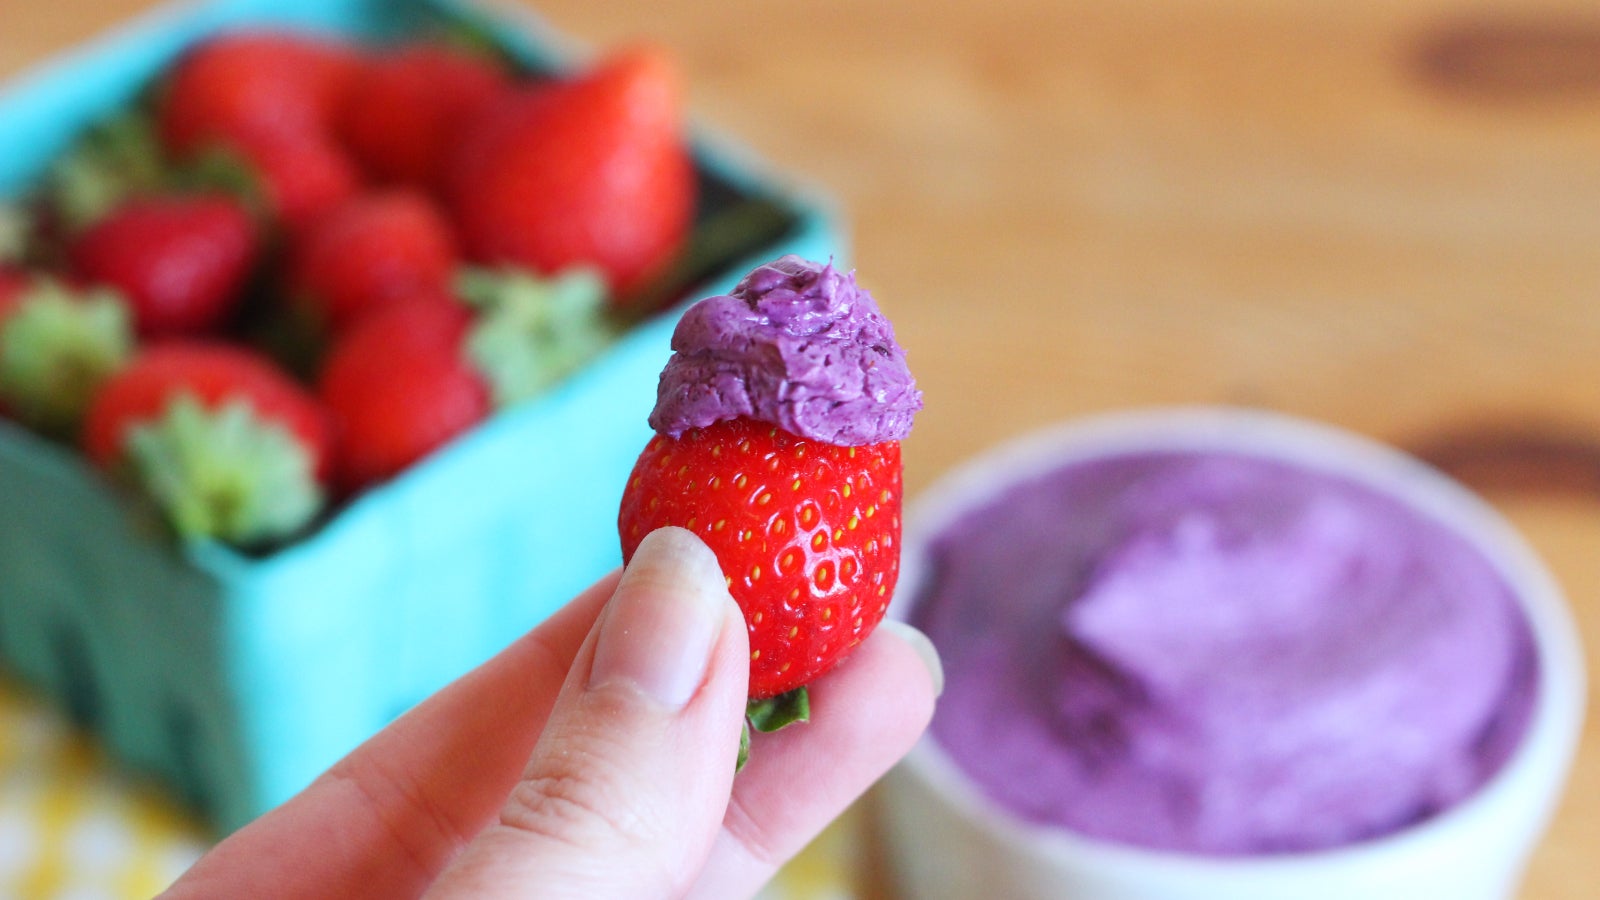 This 3-Ingredient Whipped Dip Is As Pretty As It Is Delicious